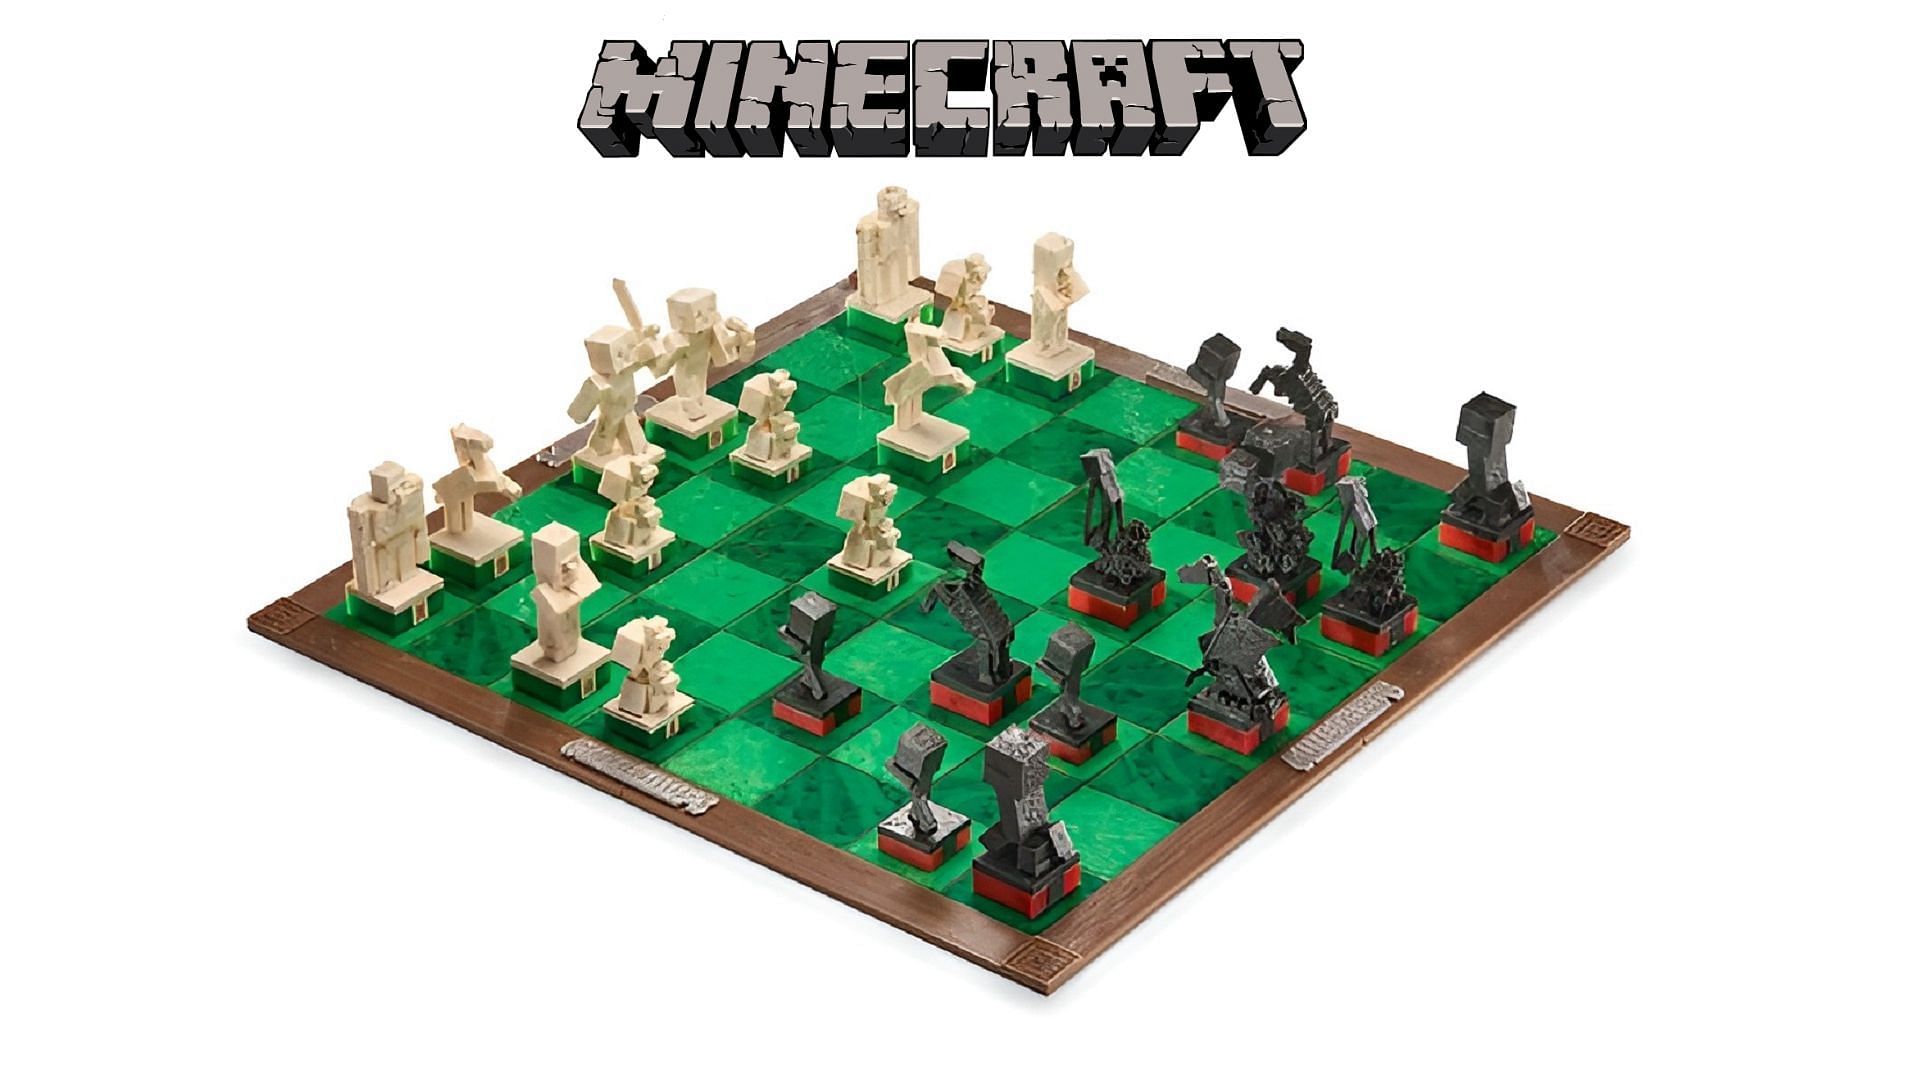 &quot;Woah! That is super cool&quot;: Fan shares impressive Minecraft themed chess set, leaving everyone in awe